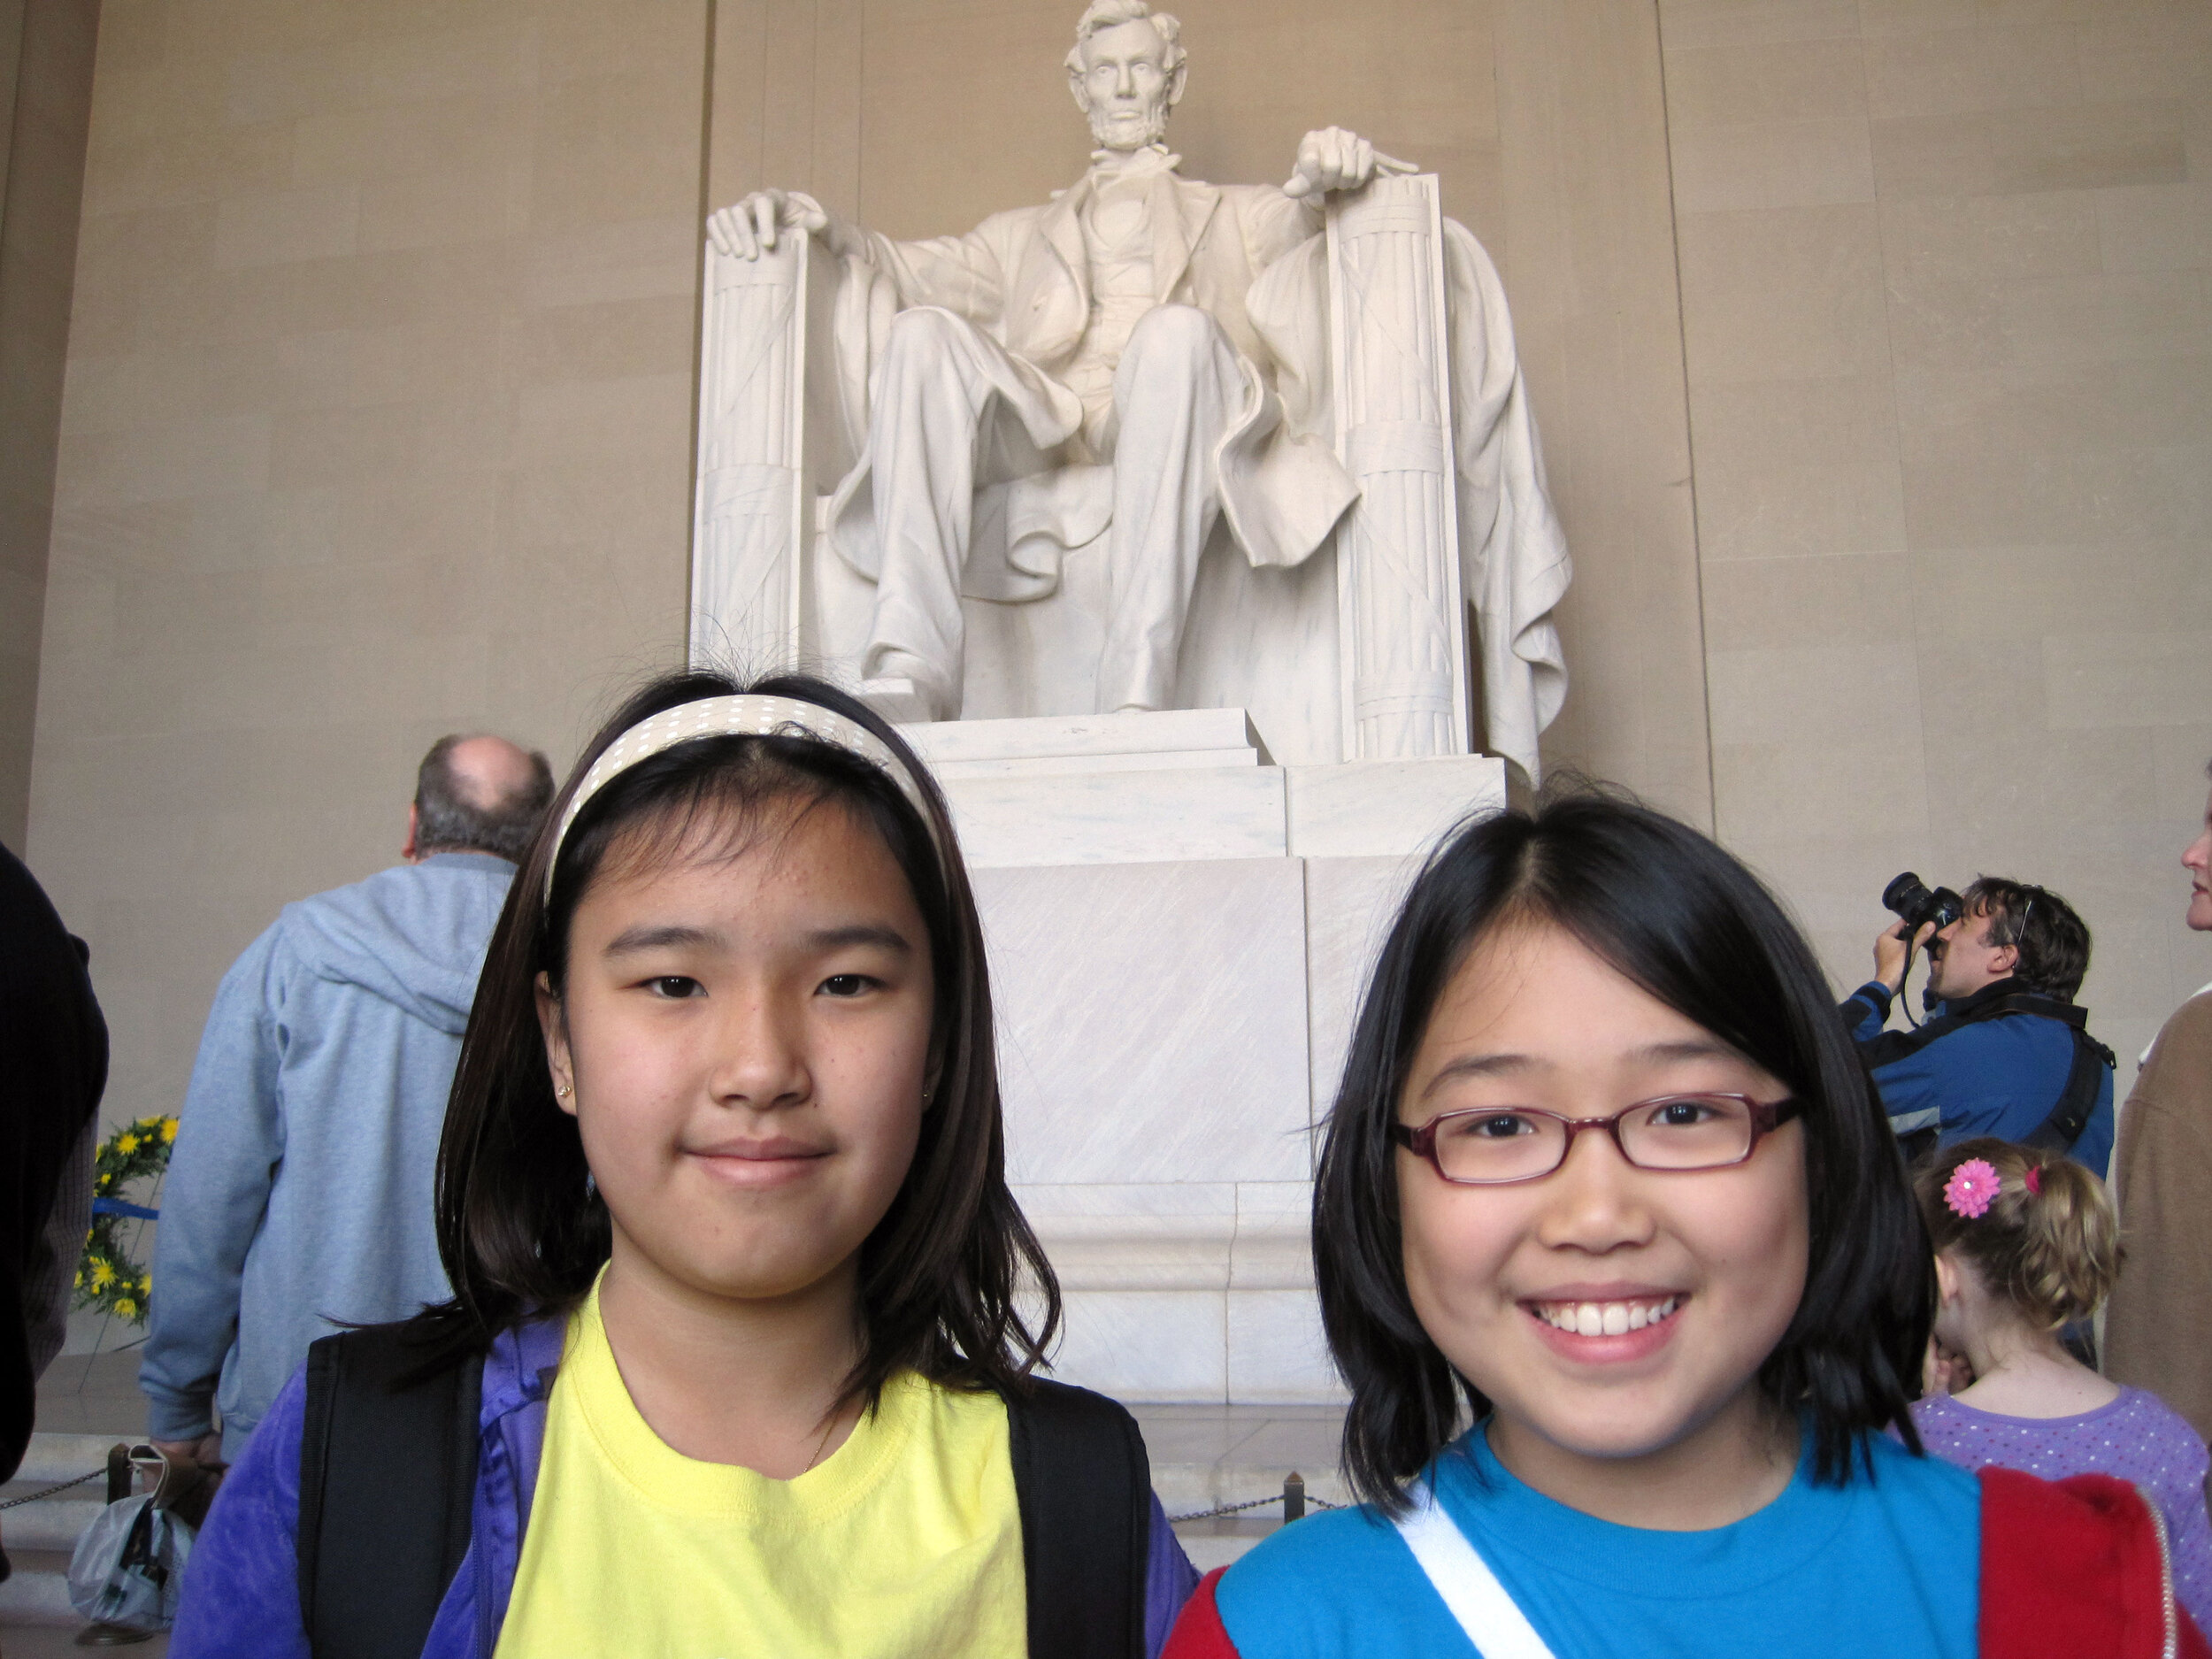  A Great Moment with Mr. Lincoln 